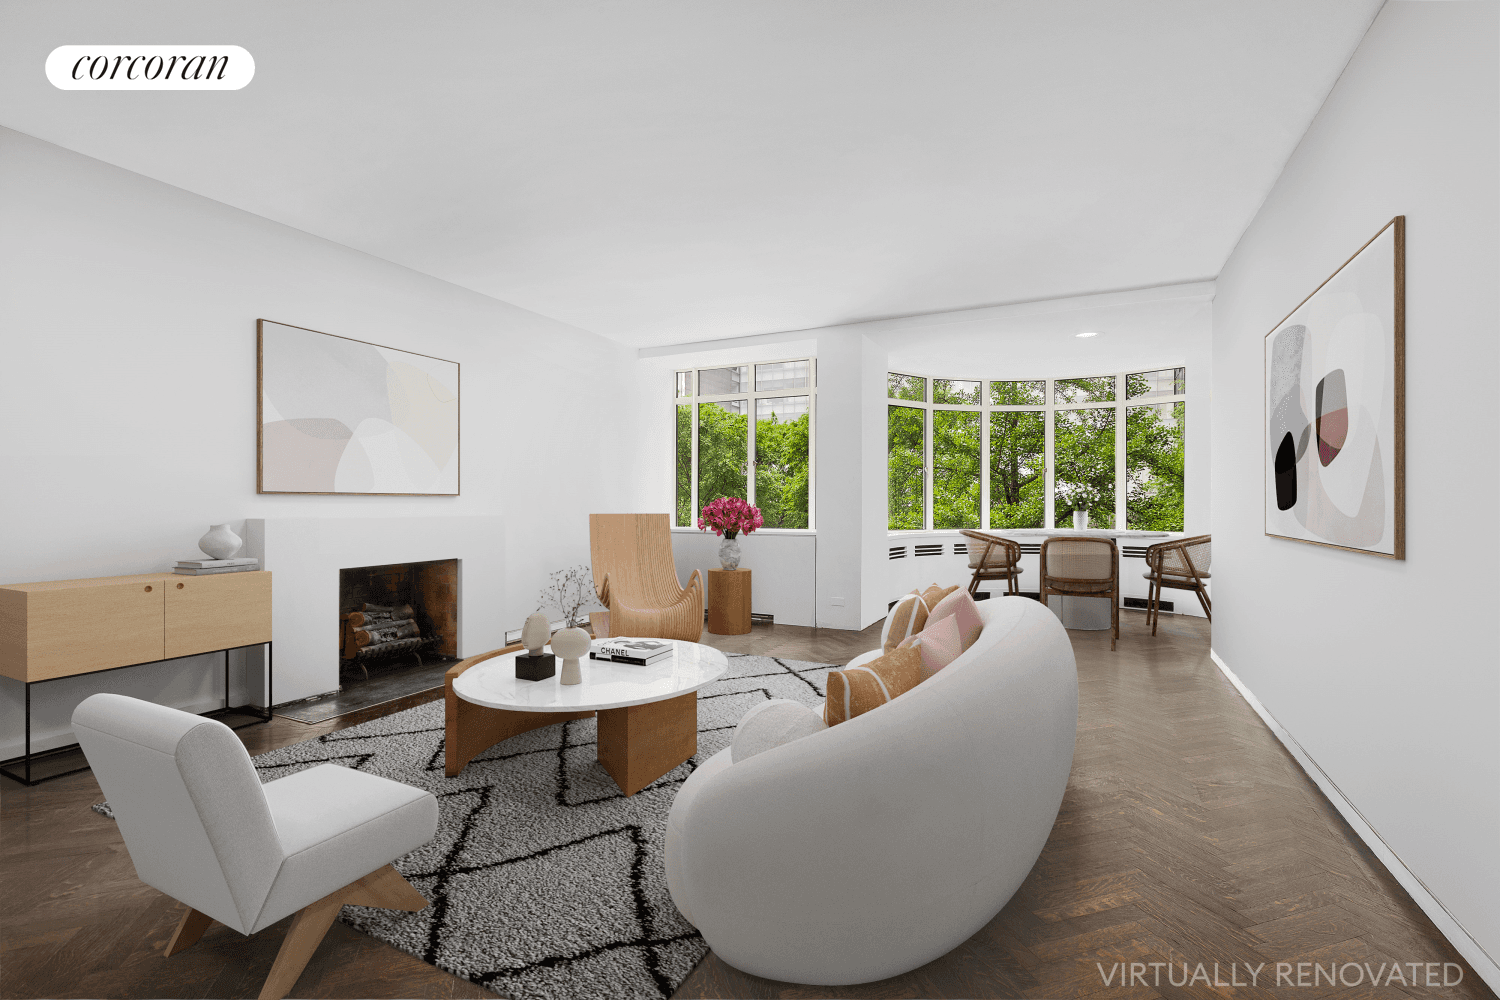 Apt. 3C at 17 West 54th Street is a glamorous, spacious one bedroom in the renown Rockefeller Apartments, overlooking the Museum of Modern Art sculpture garden.